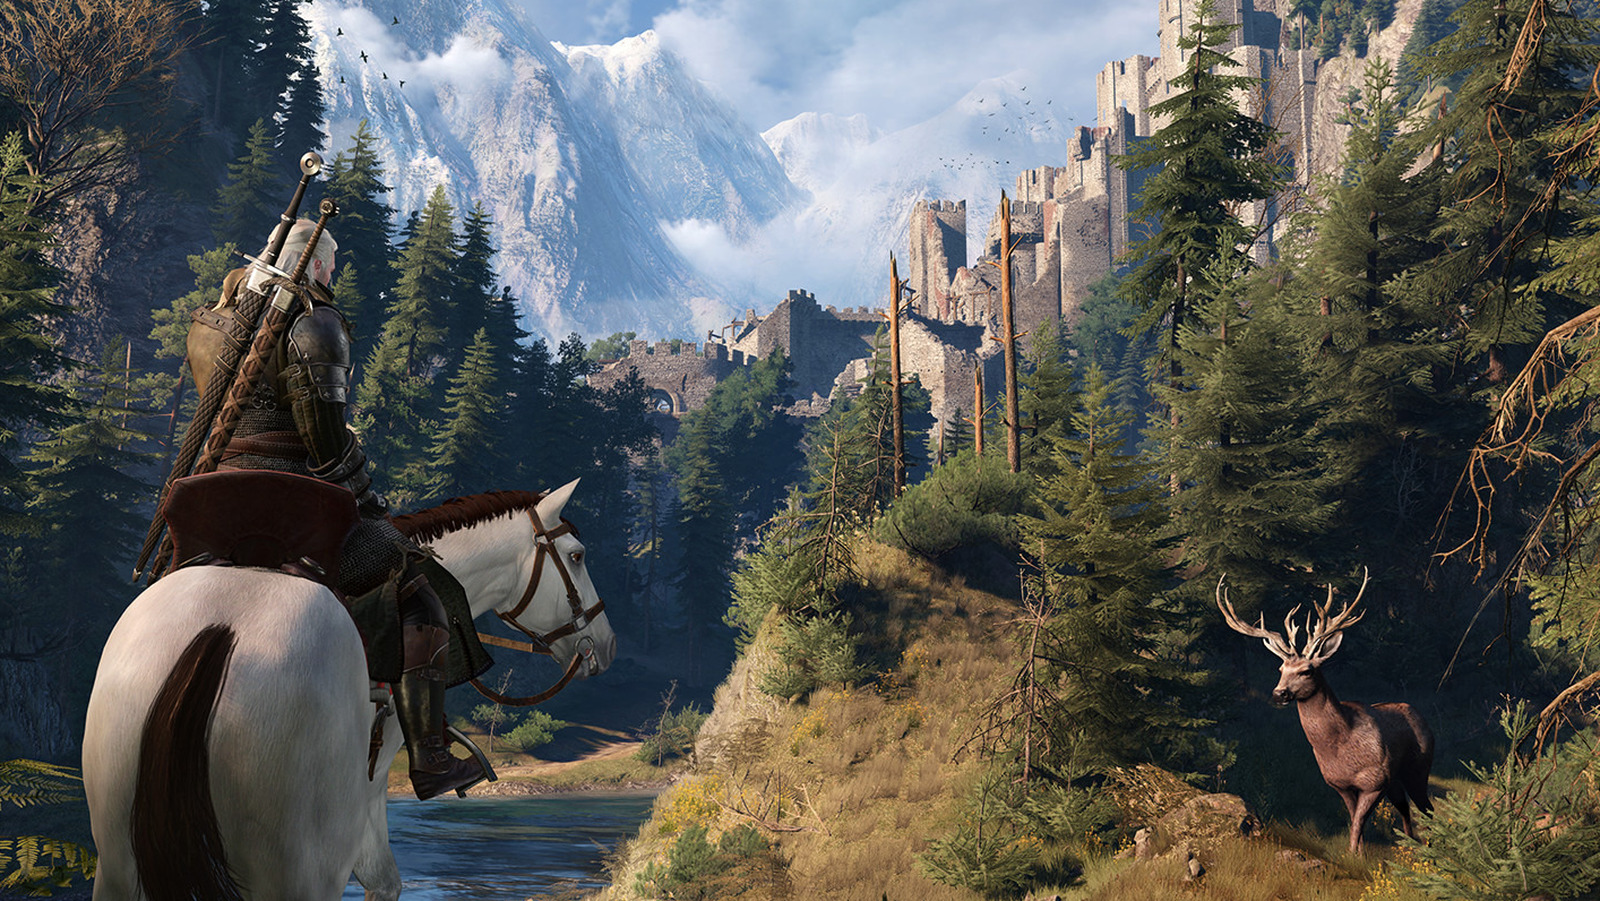 The Witcher 3 Next-Gen Version Delayed Again - But That May Not Be A Bad Thing